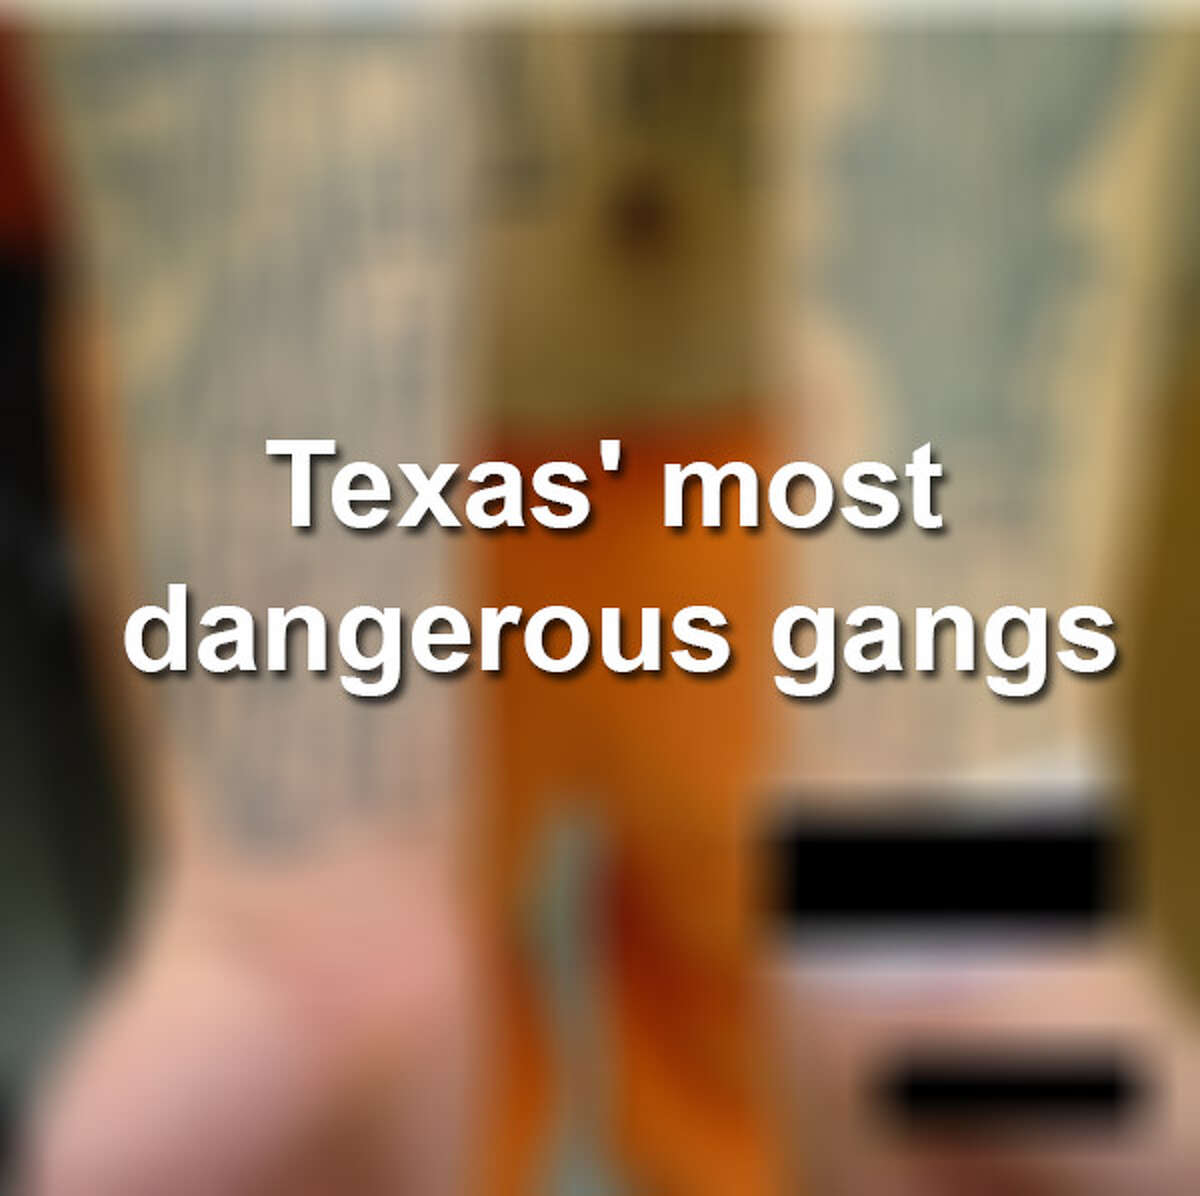 Keep scrolling to see who the most dangerous gangs are in the Lone Star state.